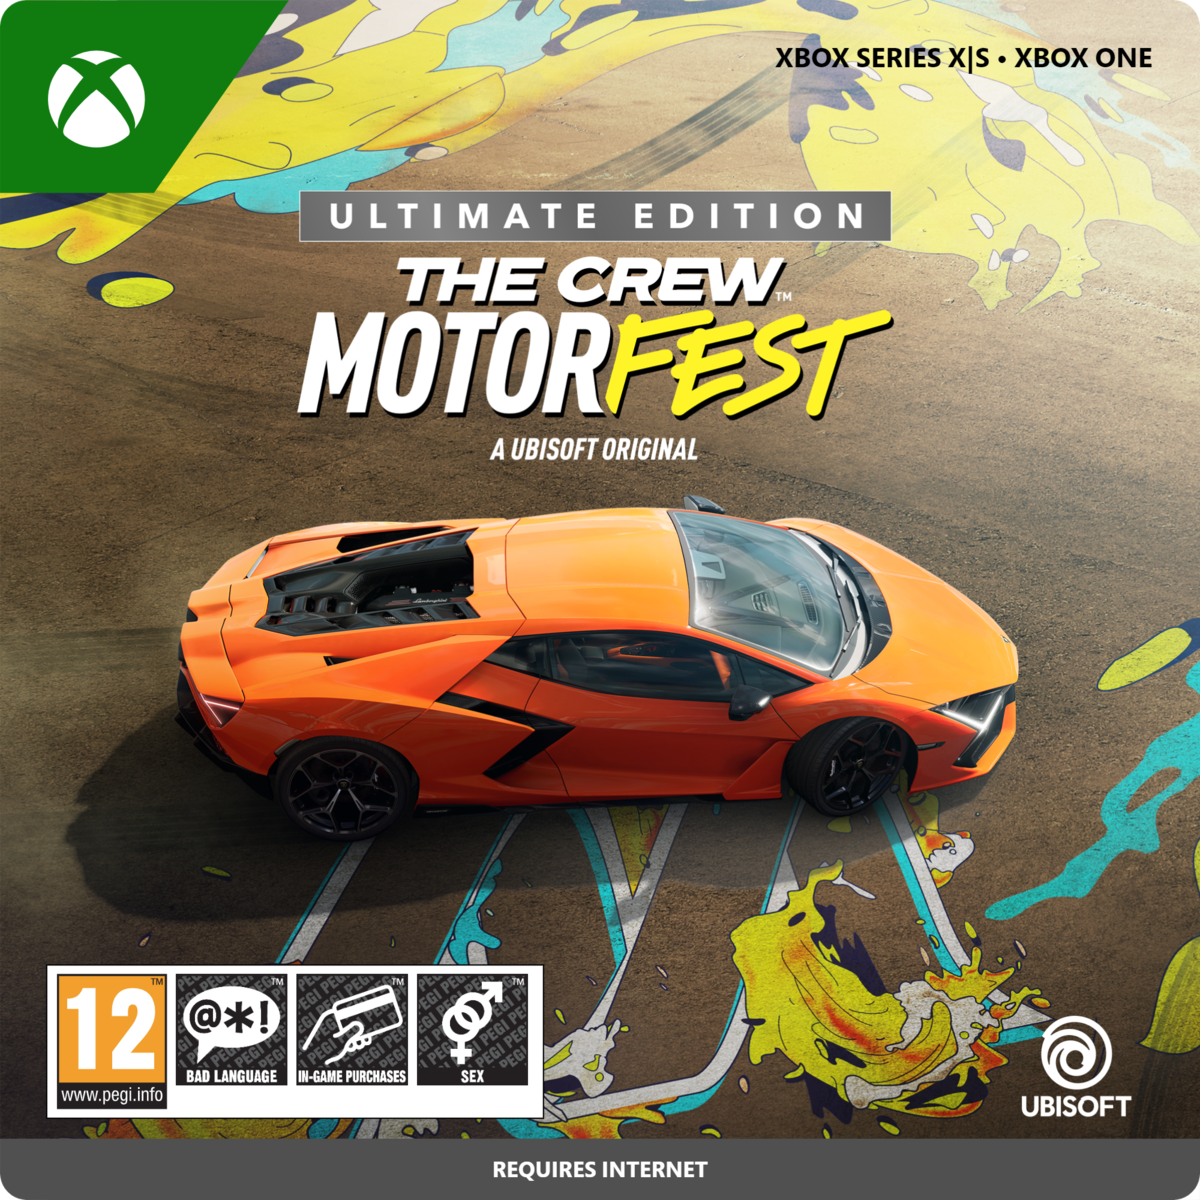 Buy The Crew Motorfest - Available Day 1 on Ubisoft+